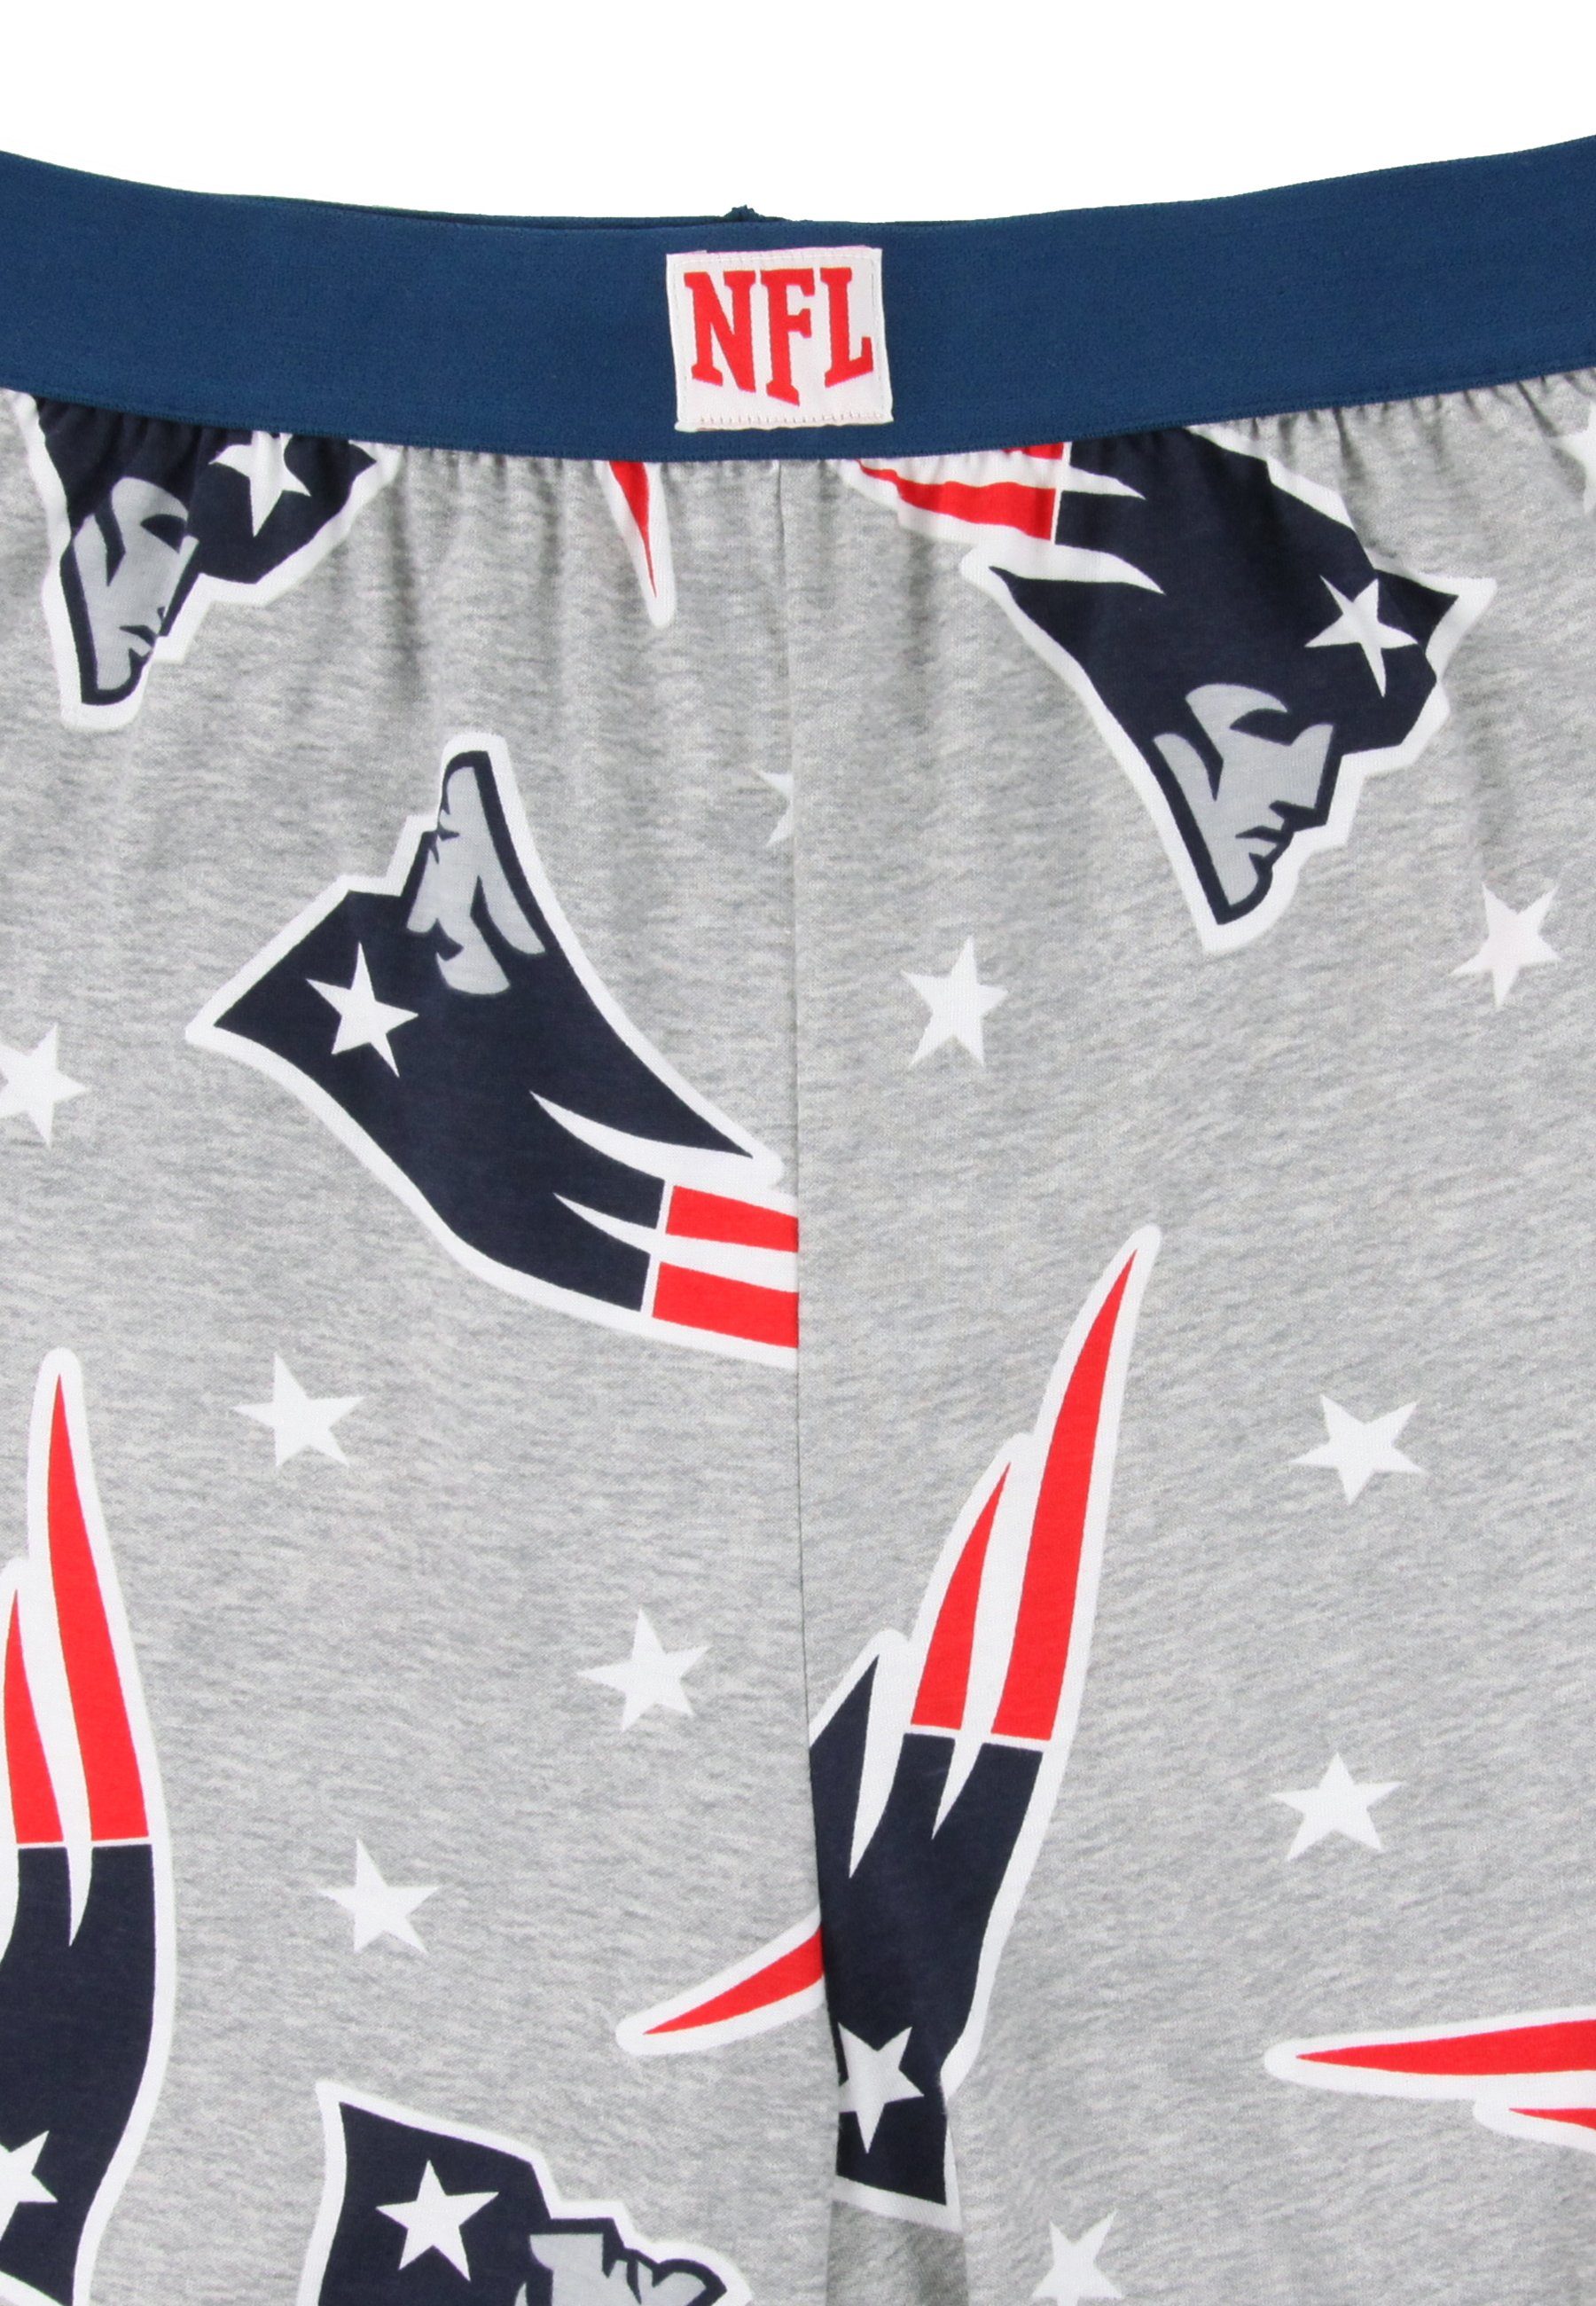 Recovered Loungepants Loungepants New Patriots England Stars NFL and Grey Marl Logo